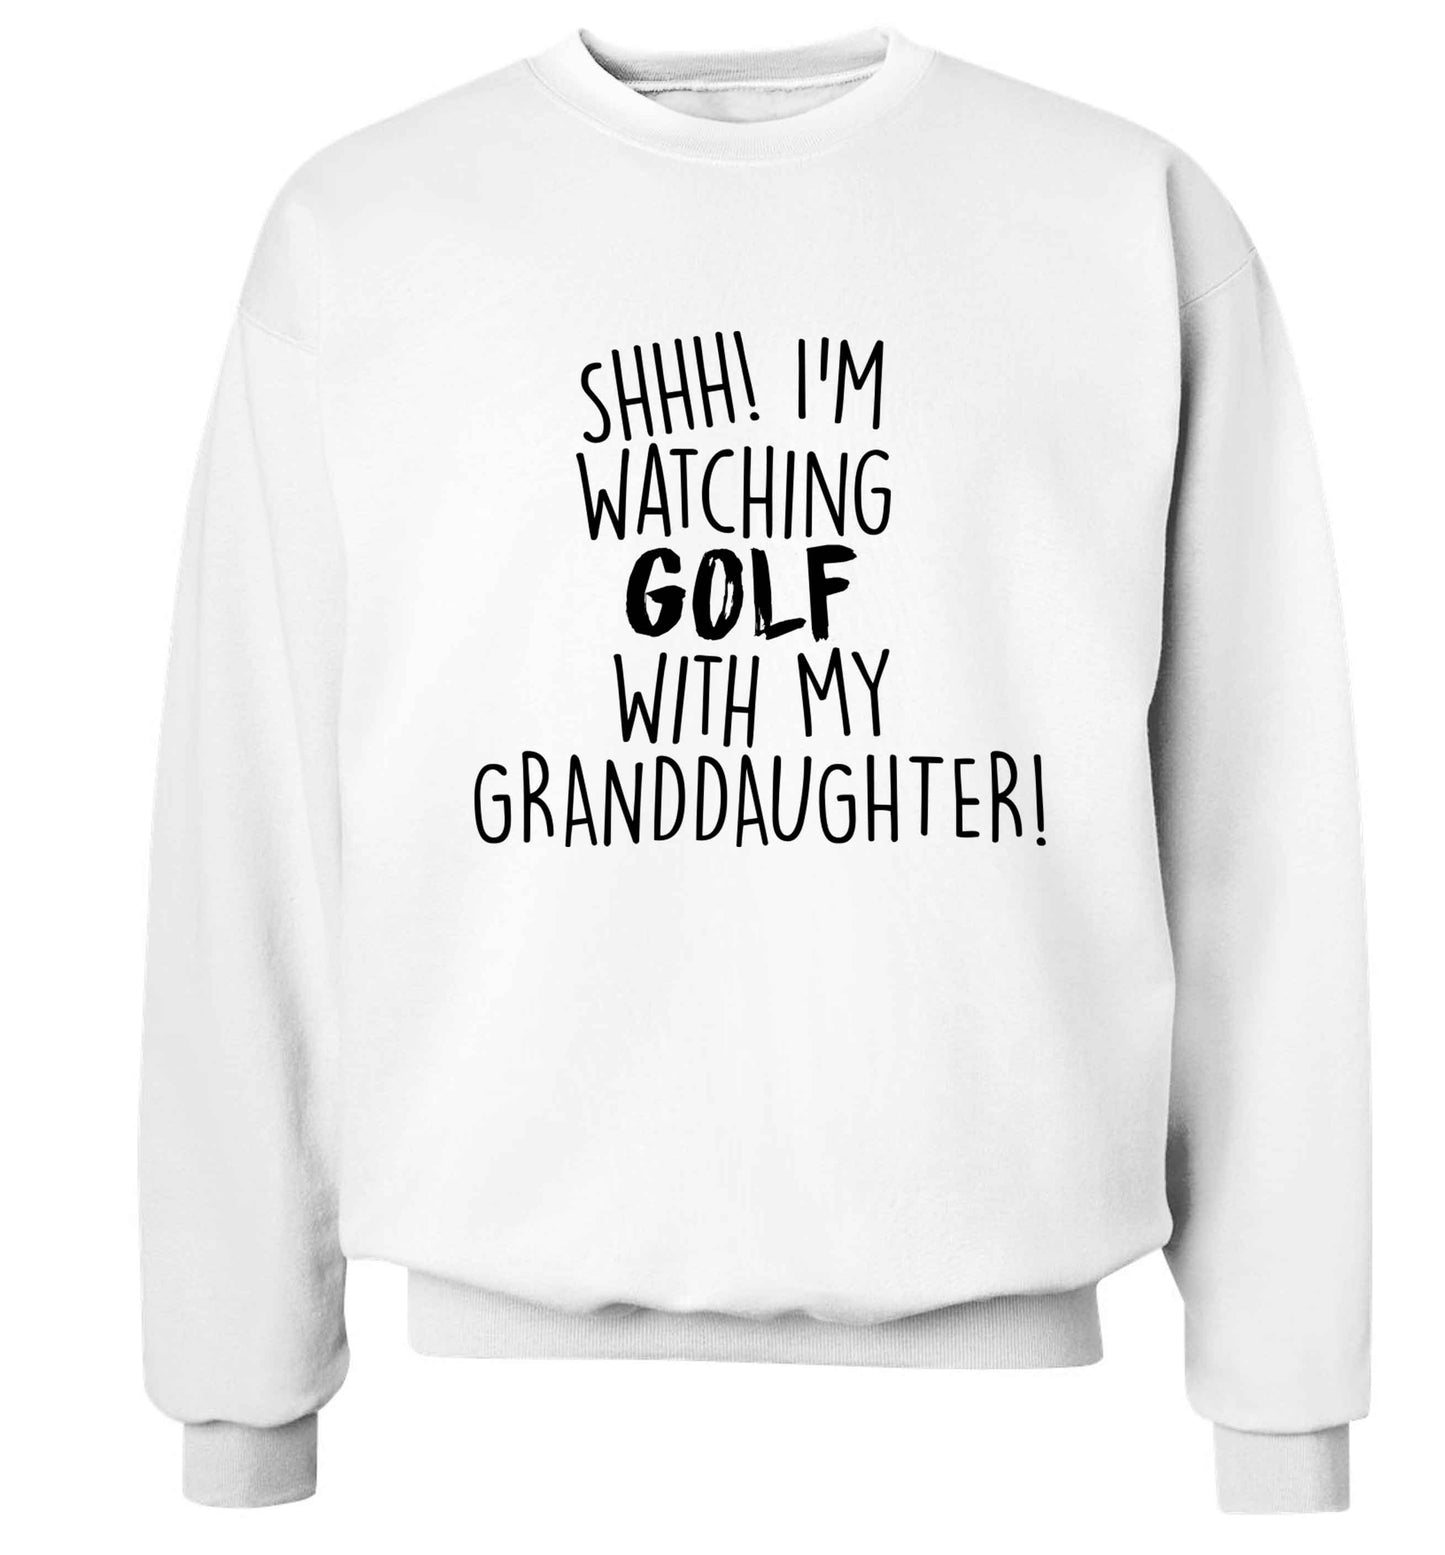 Shh I'm watching golf with my granddaughter Adult's unisex white Sweater 2XL